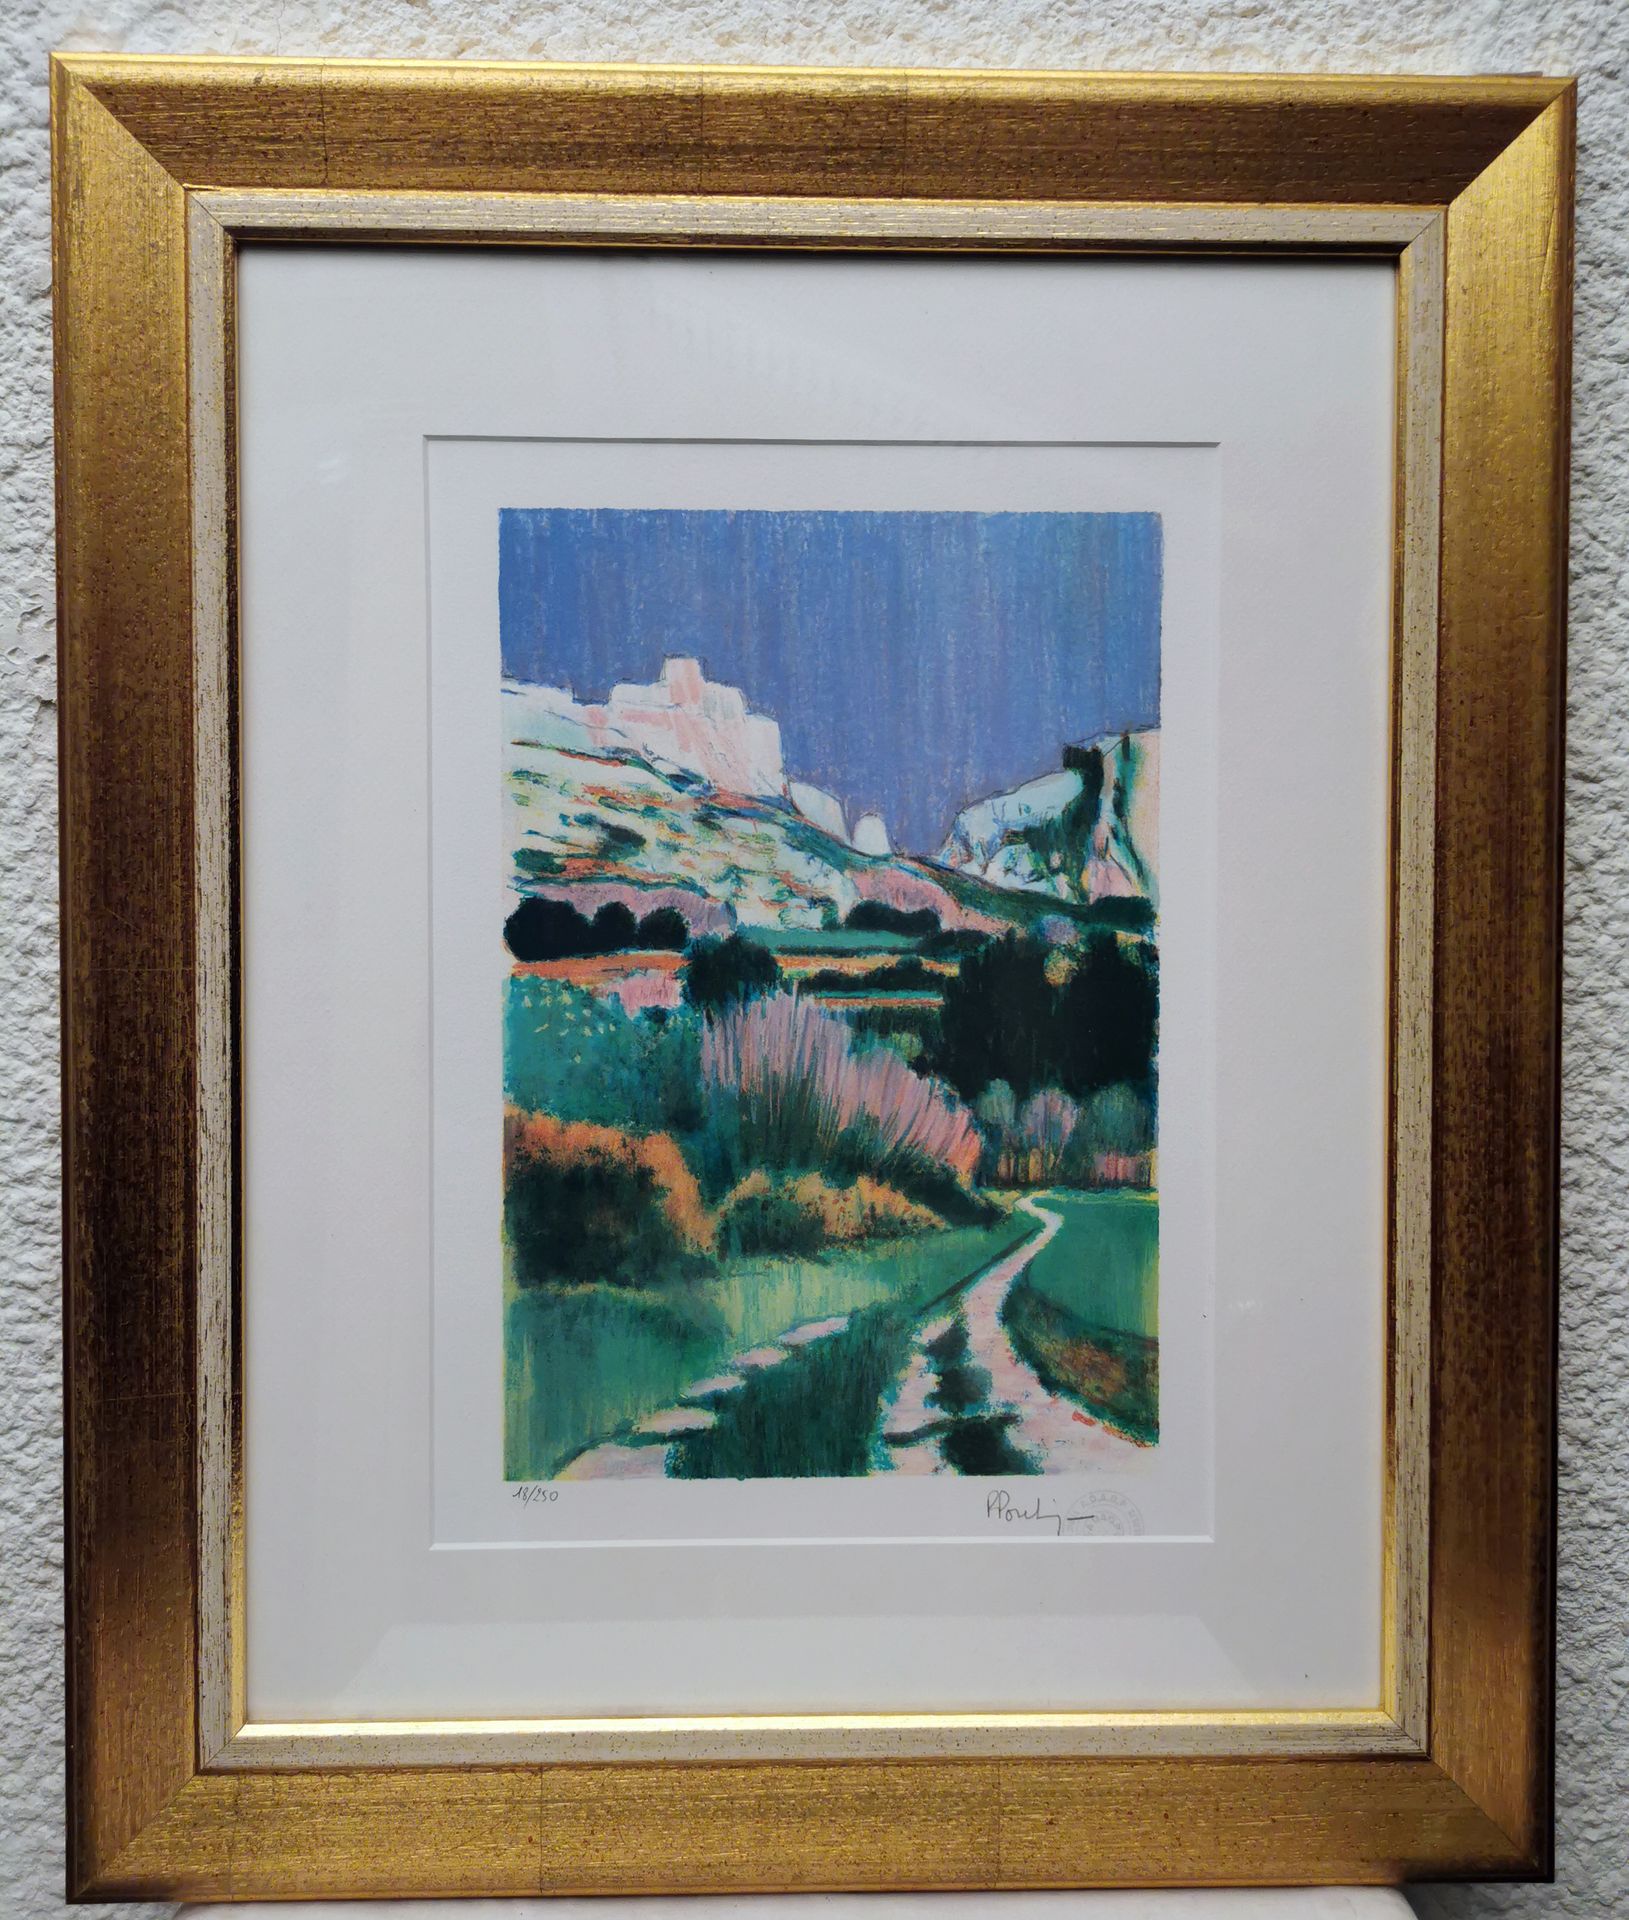 Pierre Poulin PIERRE POULIN SBD "FORTRESS IN PROVENCE" LITHOGRAPH 18/250 UNFRAME&hellip;